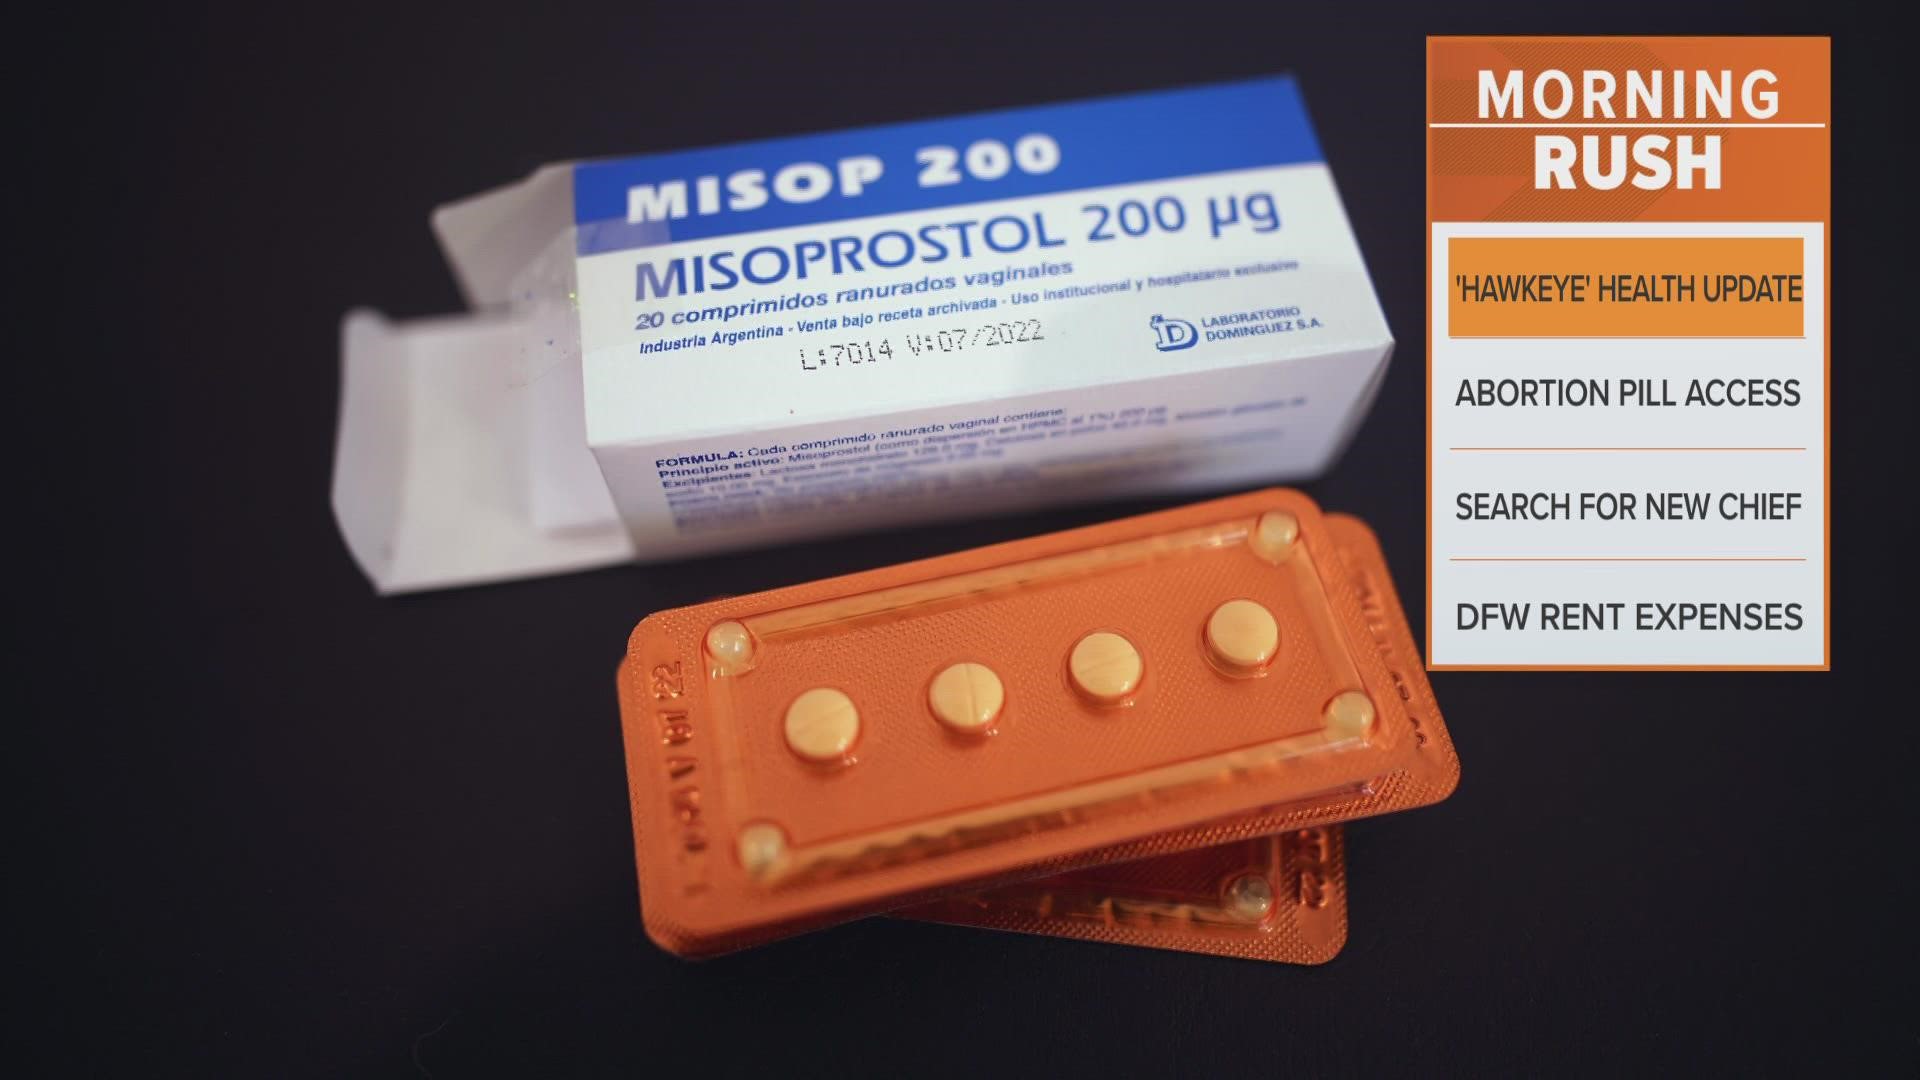 The FDA's rule change broadens availability of abortion pills to many more pharmacies, including large chains and mail-order companies.